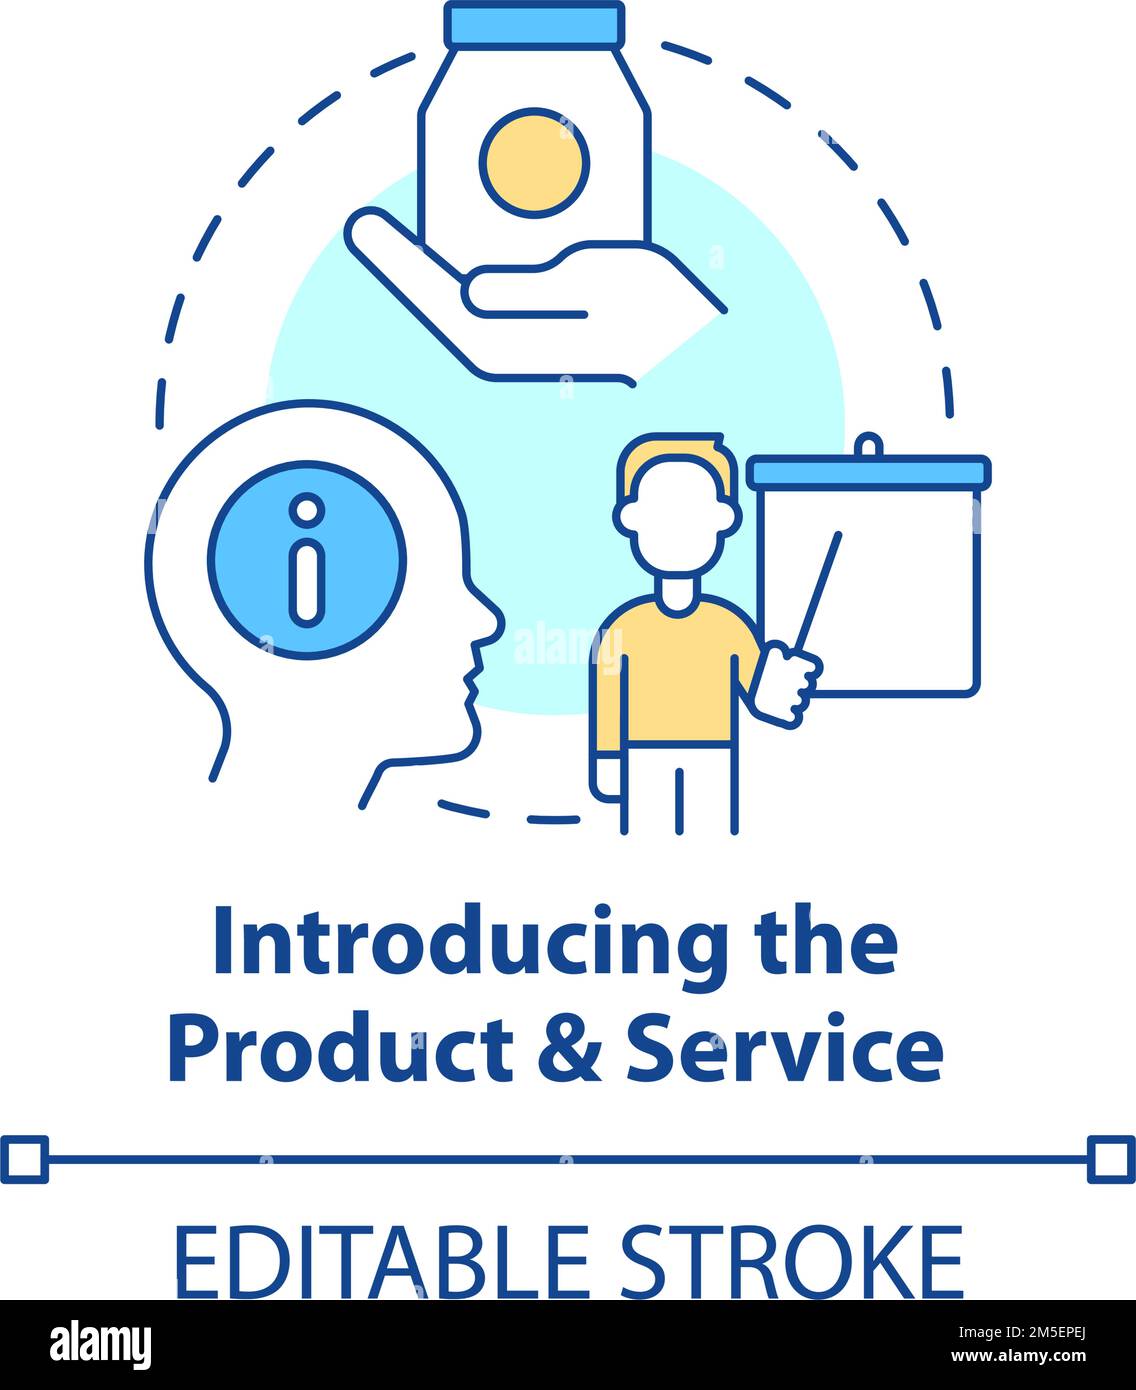 Introducing product and service concept icon Stock Vector